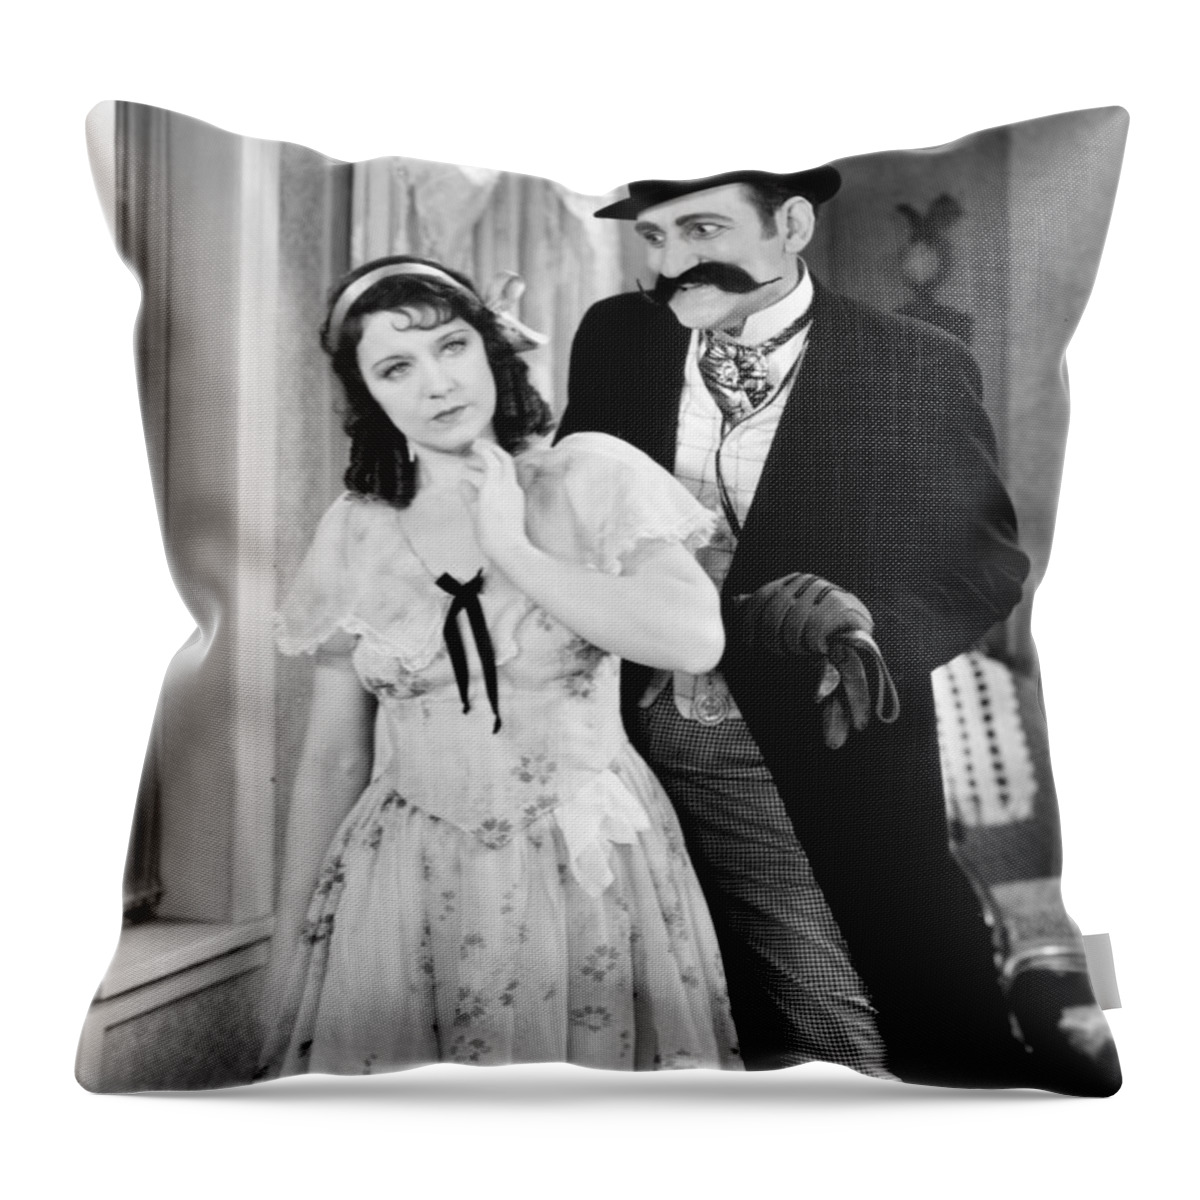 -couples- Throw Pillow featuring the photograph Silent Film Still: Couples #59 by Granger